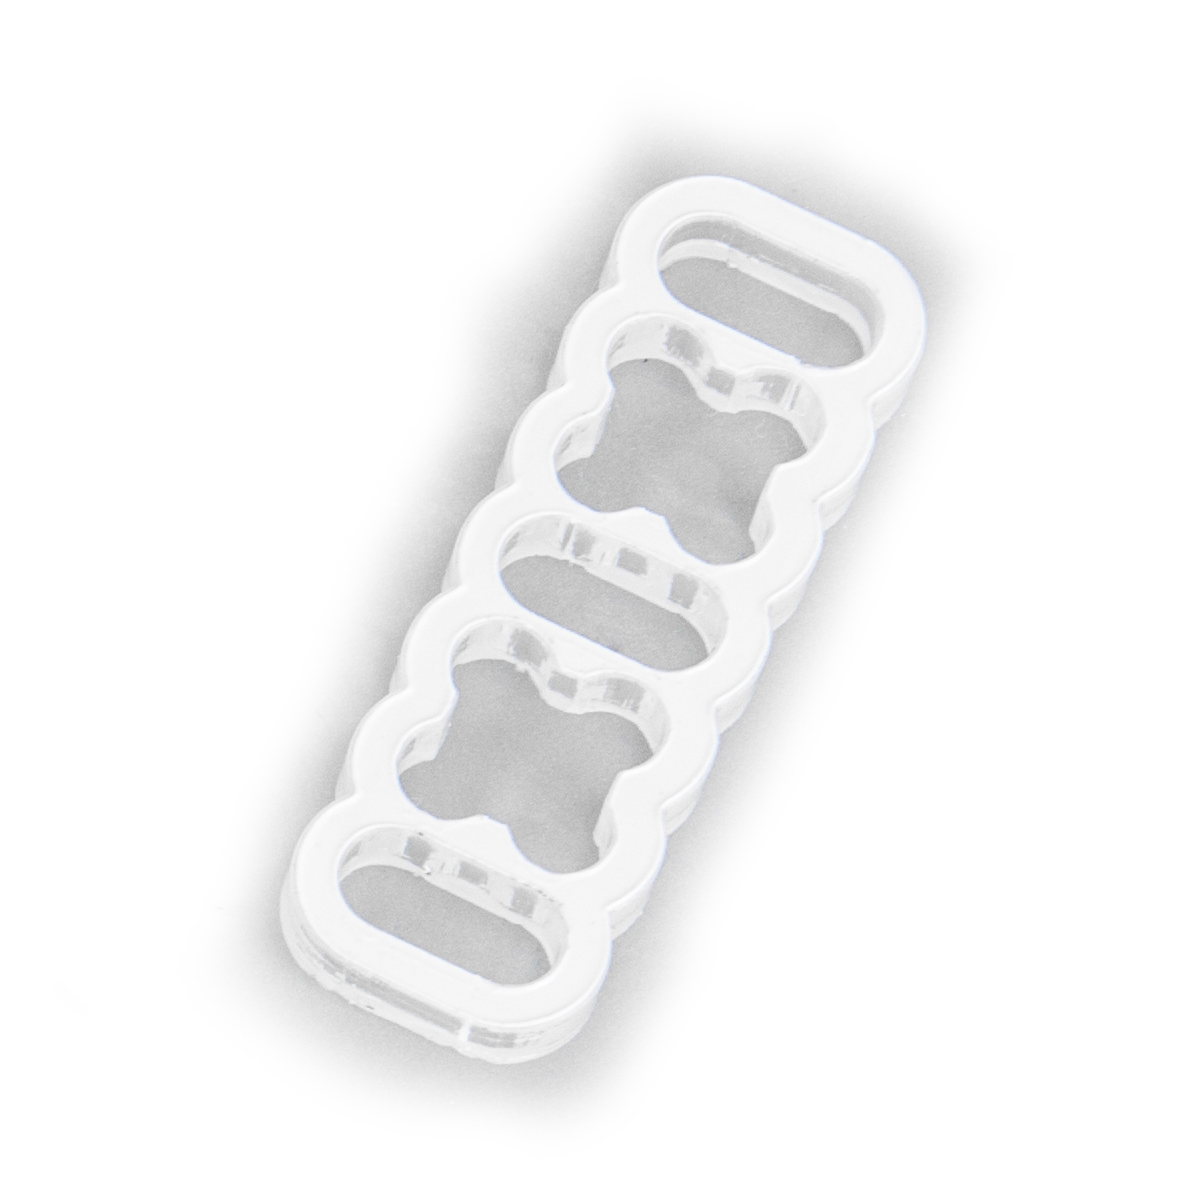 TechForge 14 Slot Stealth Cable Comb V2 - Clear